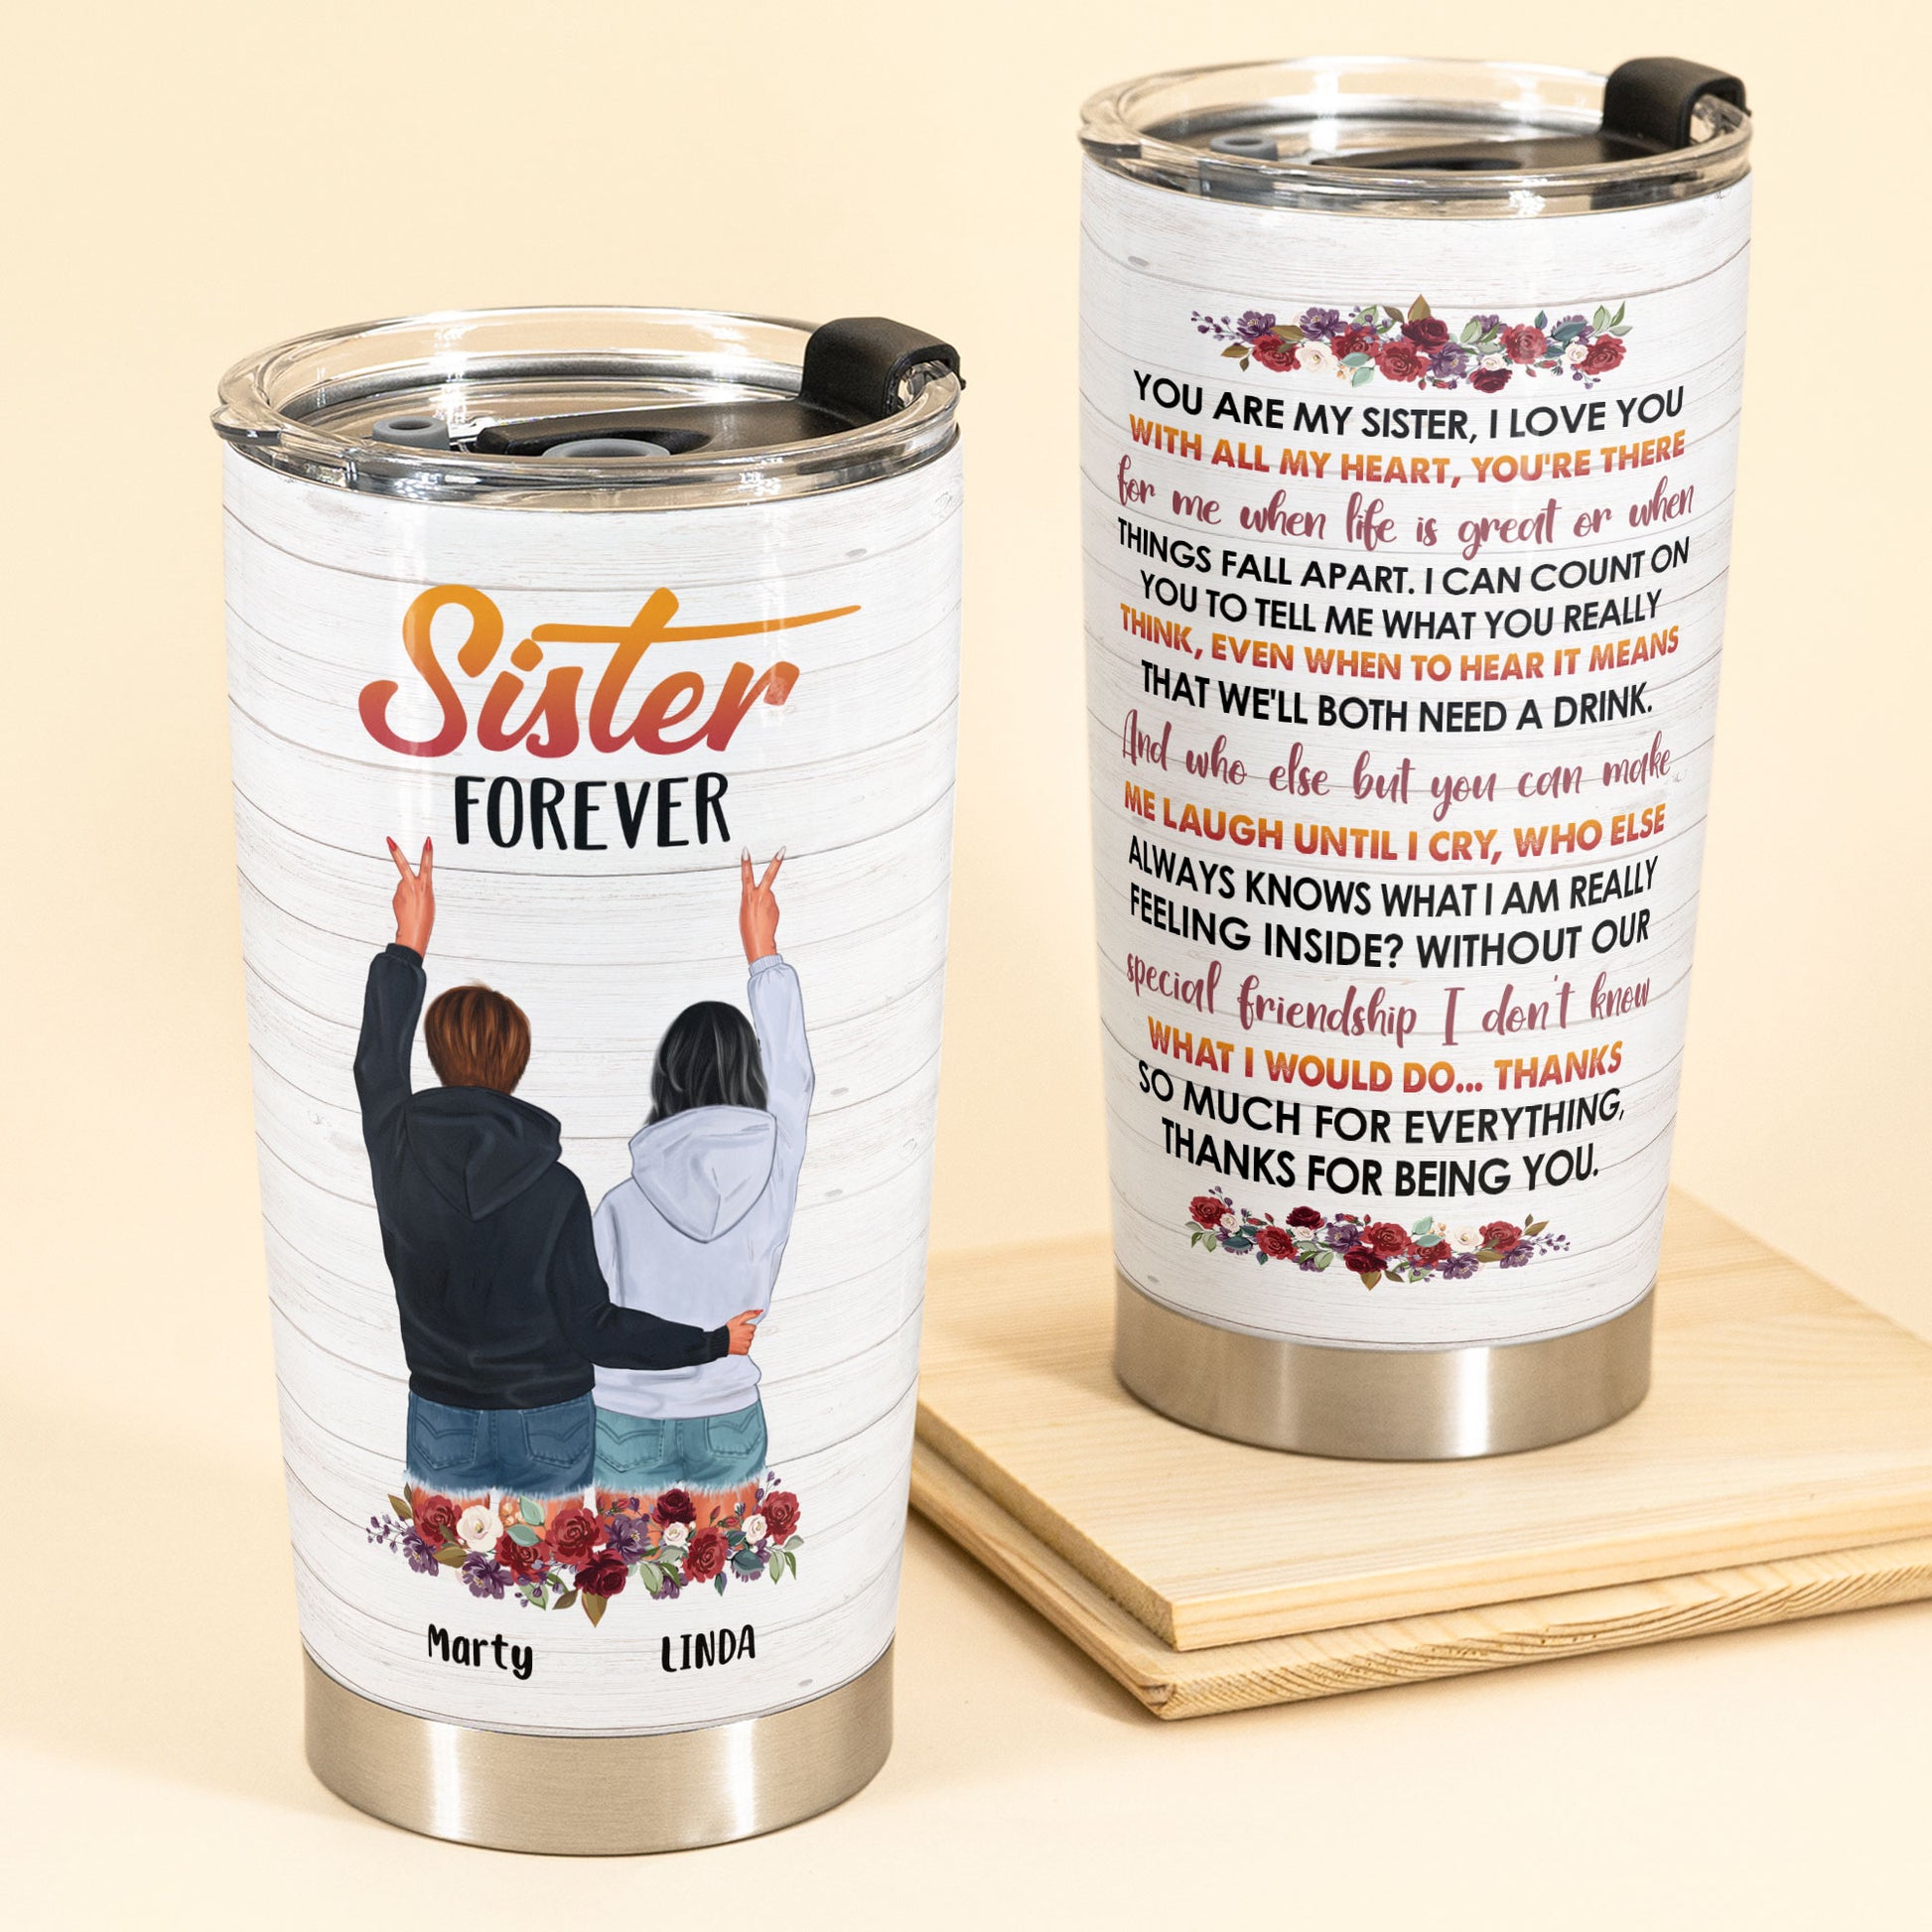 Personalized Tumbler Vacuum Insulated With Heart - Romantic Gift